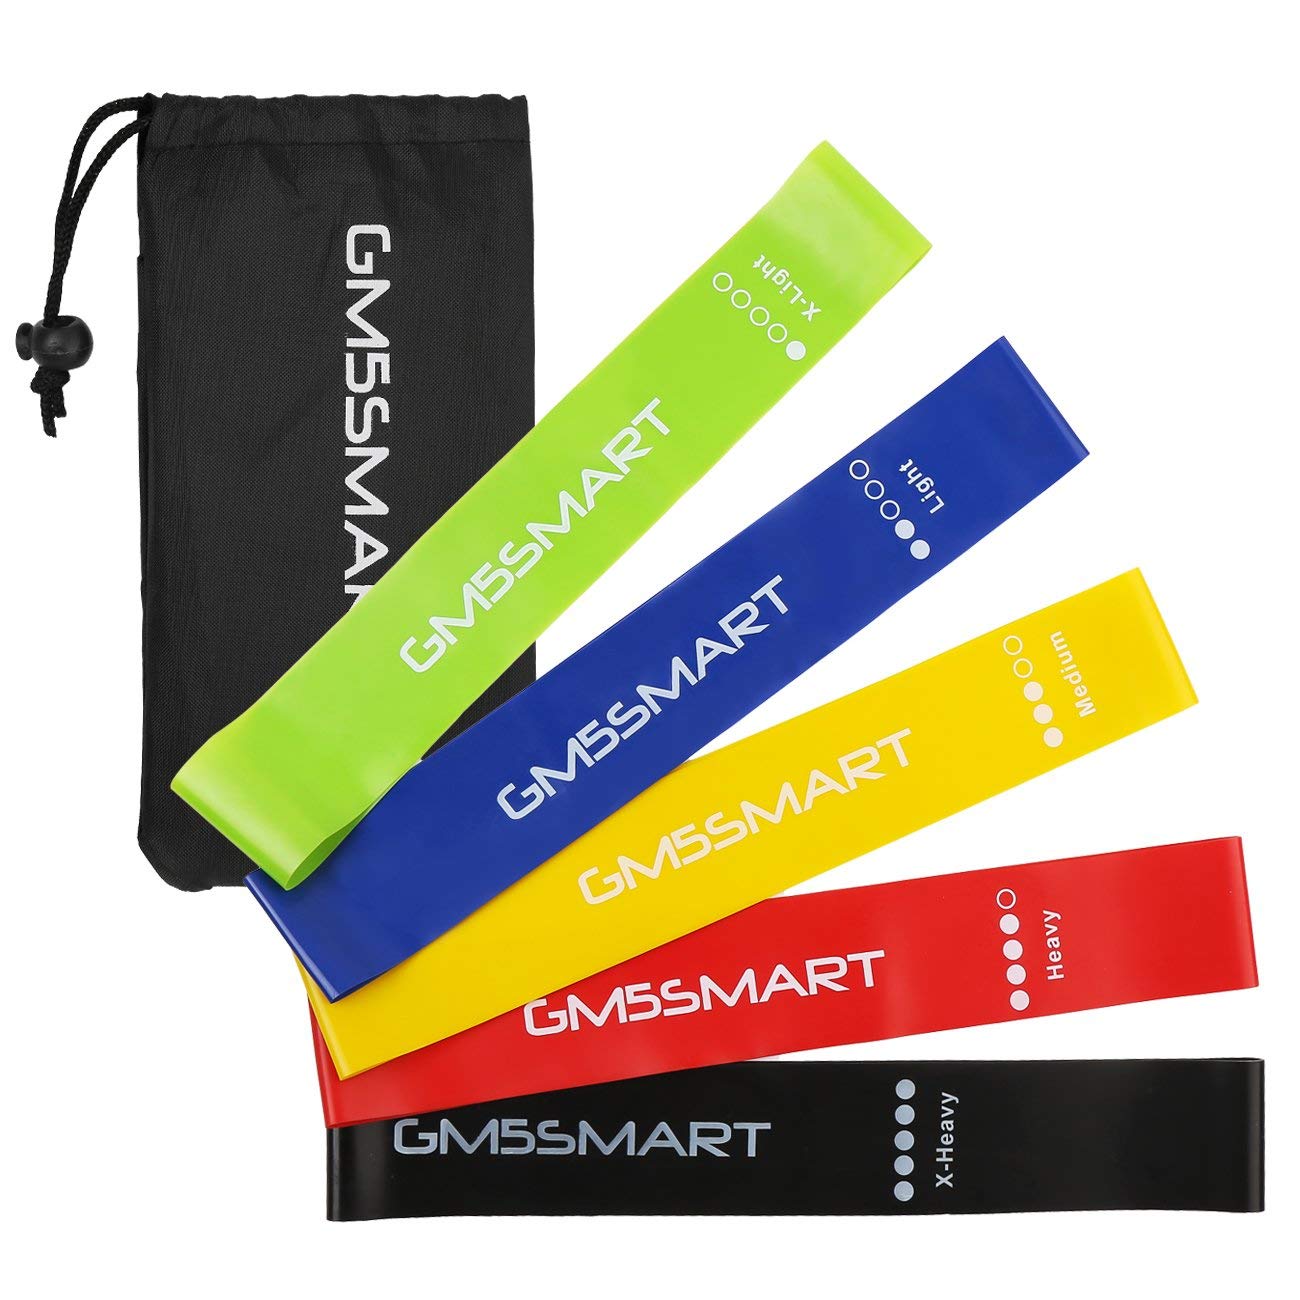 Just what I needed for my daughter the GM5SMART Exercise Bands